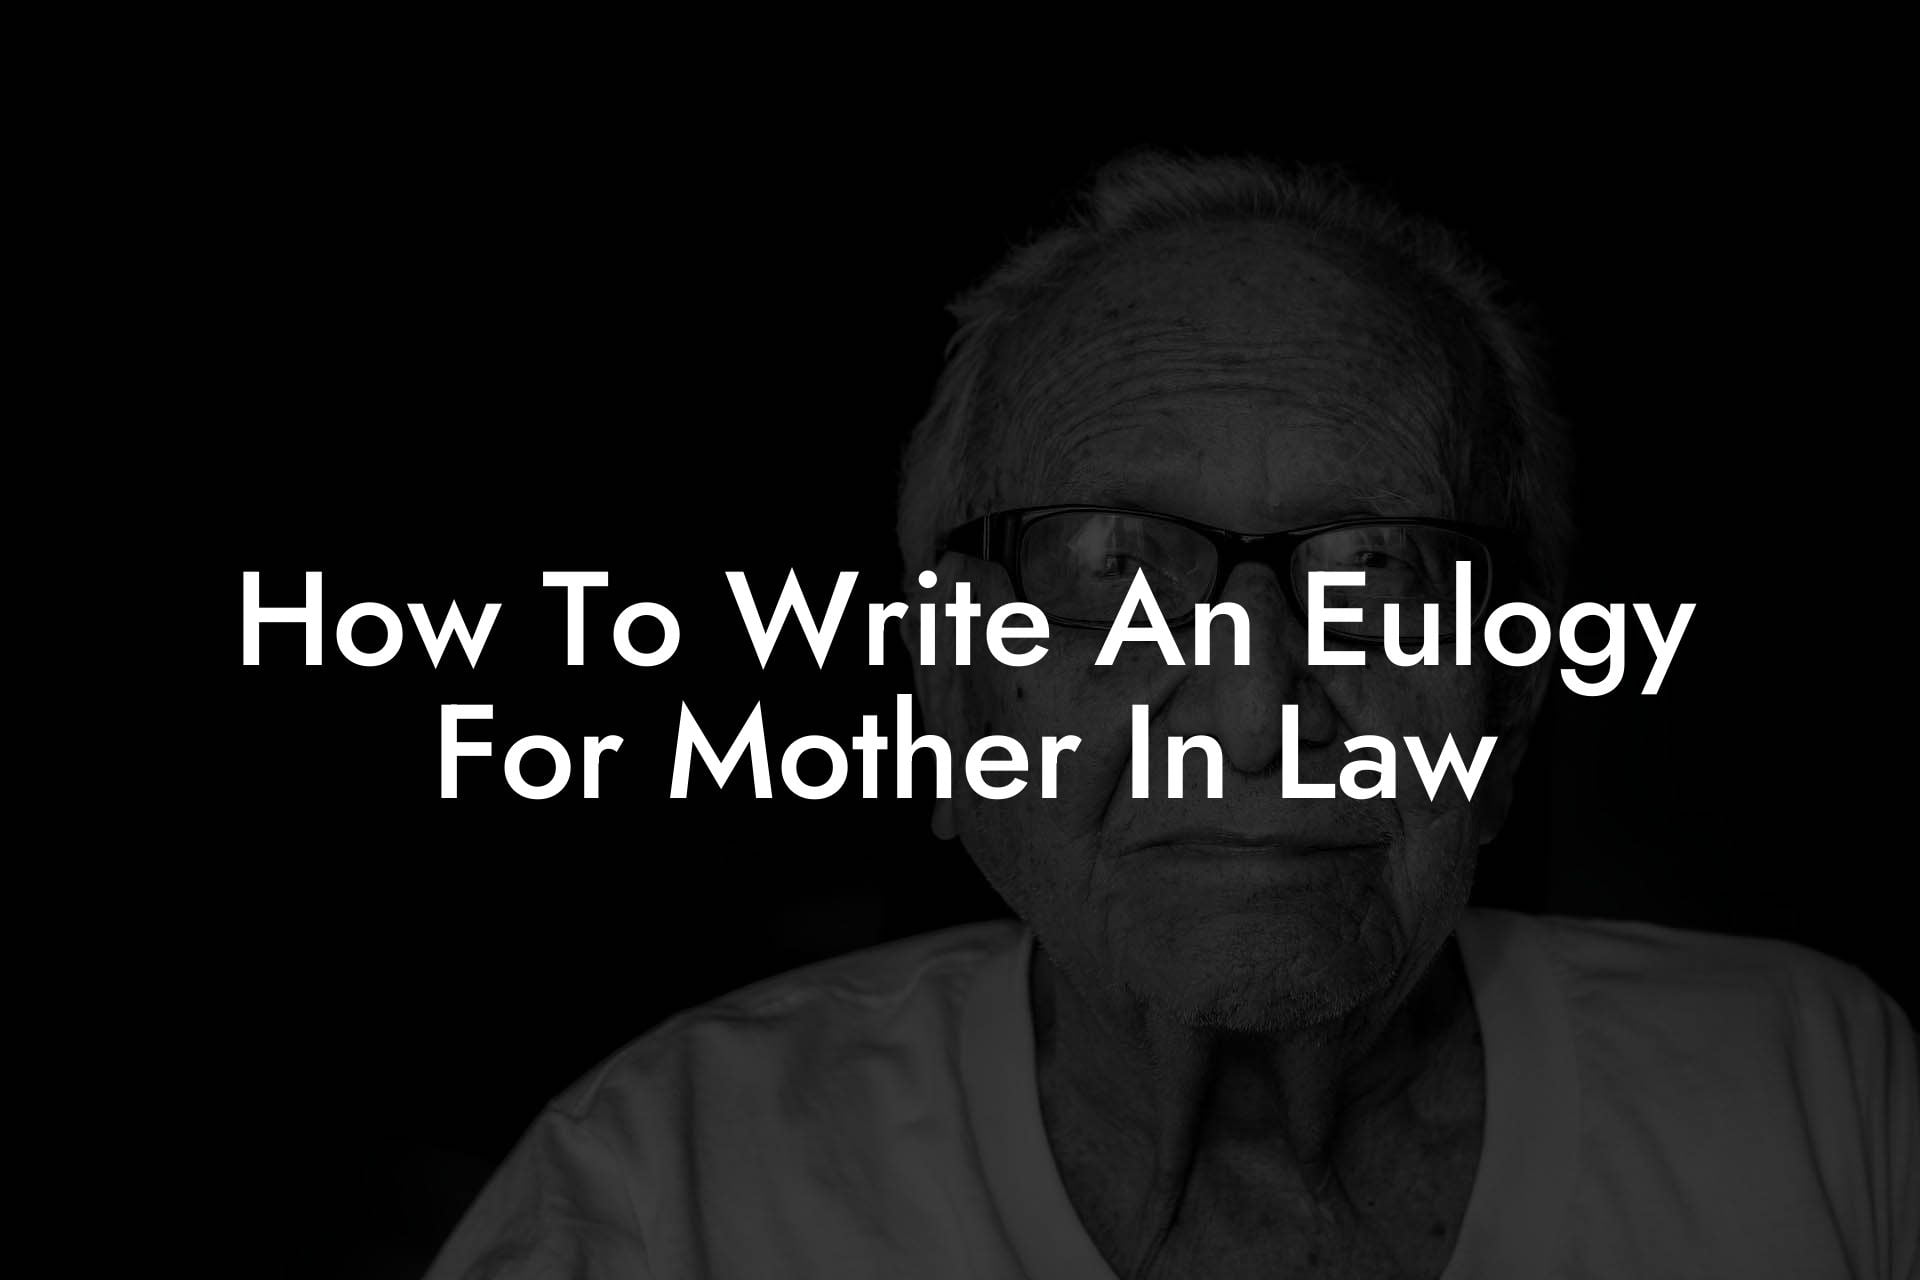 How To Write An Eulogy For Mother In Law